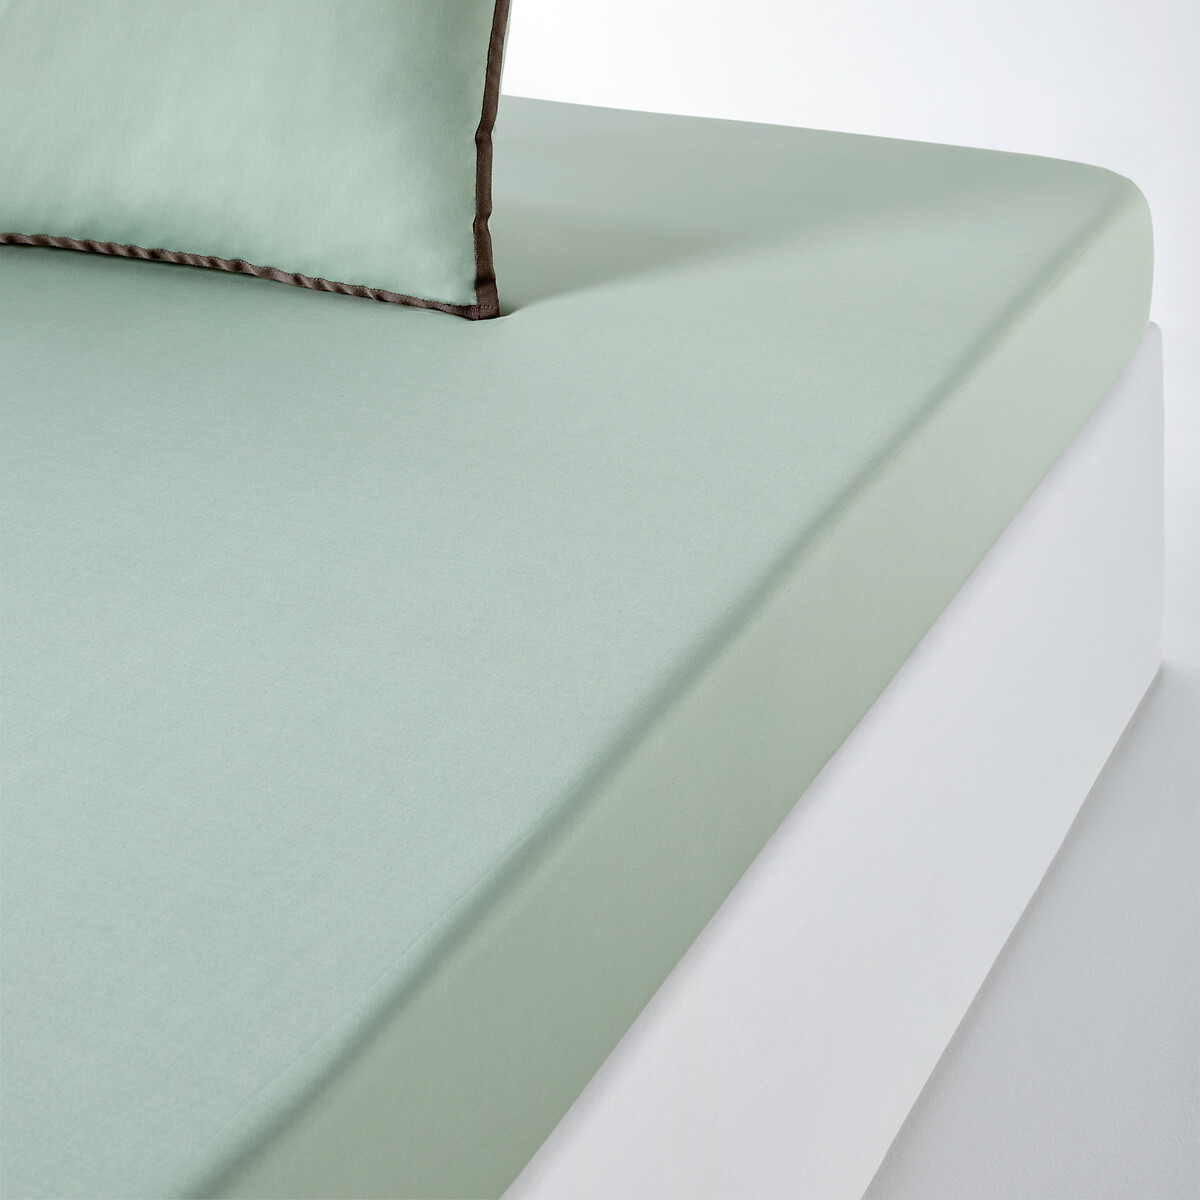 Bolzano 30cm 100% Cotton Percale 200 Thread Count Fitted Sheet